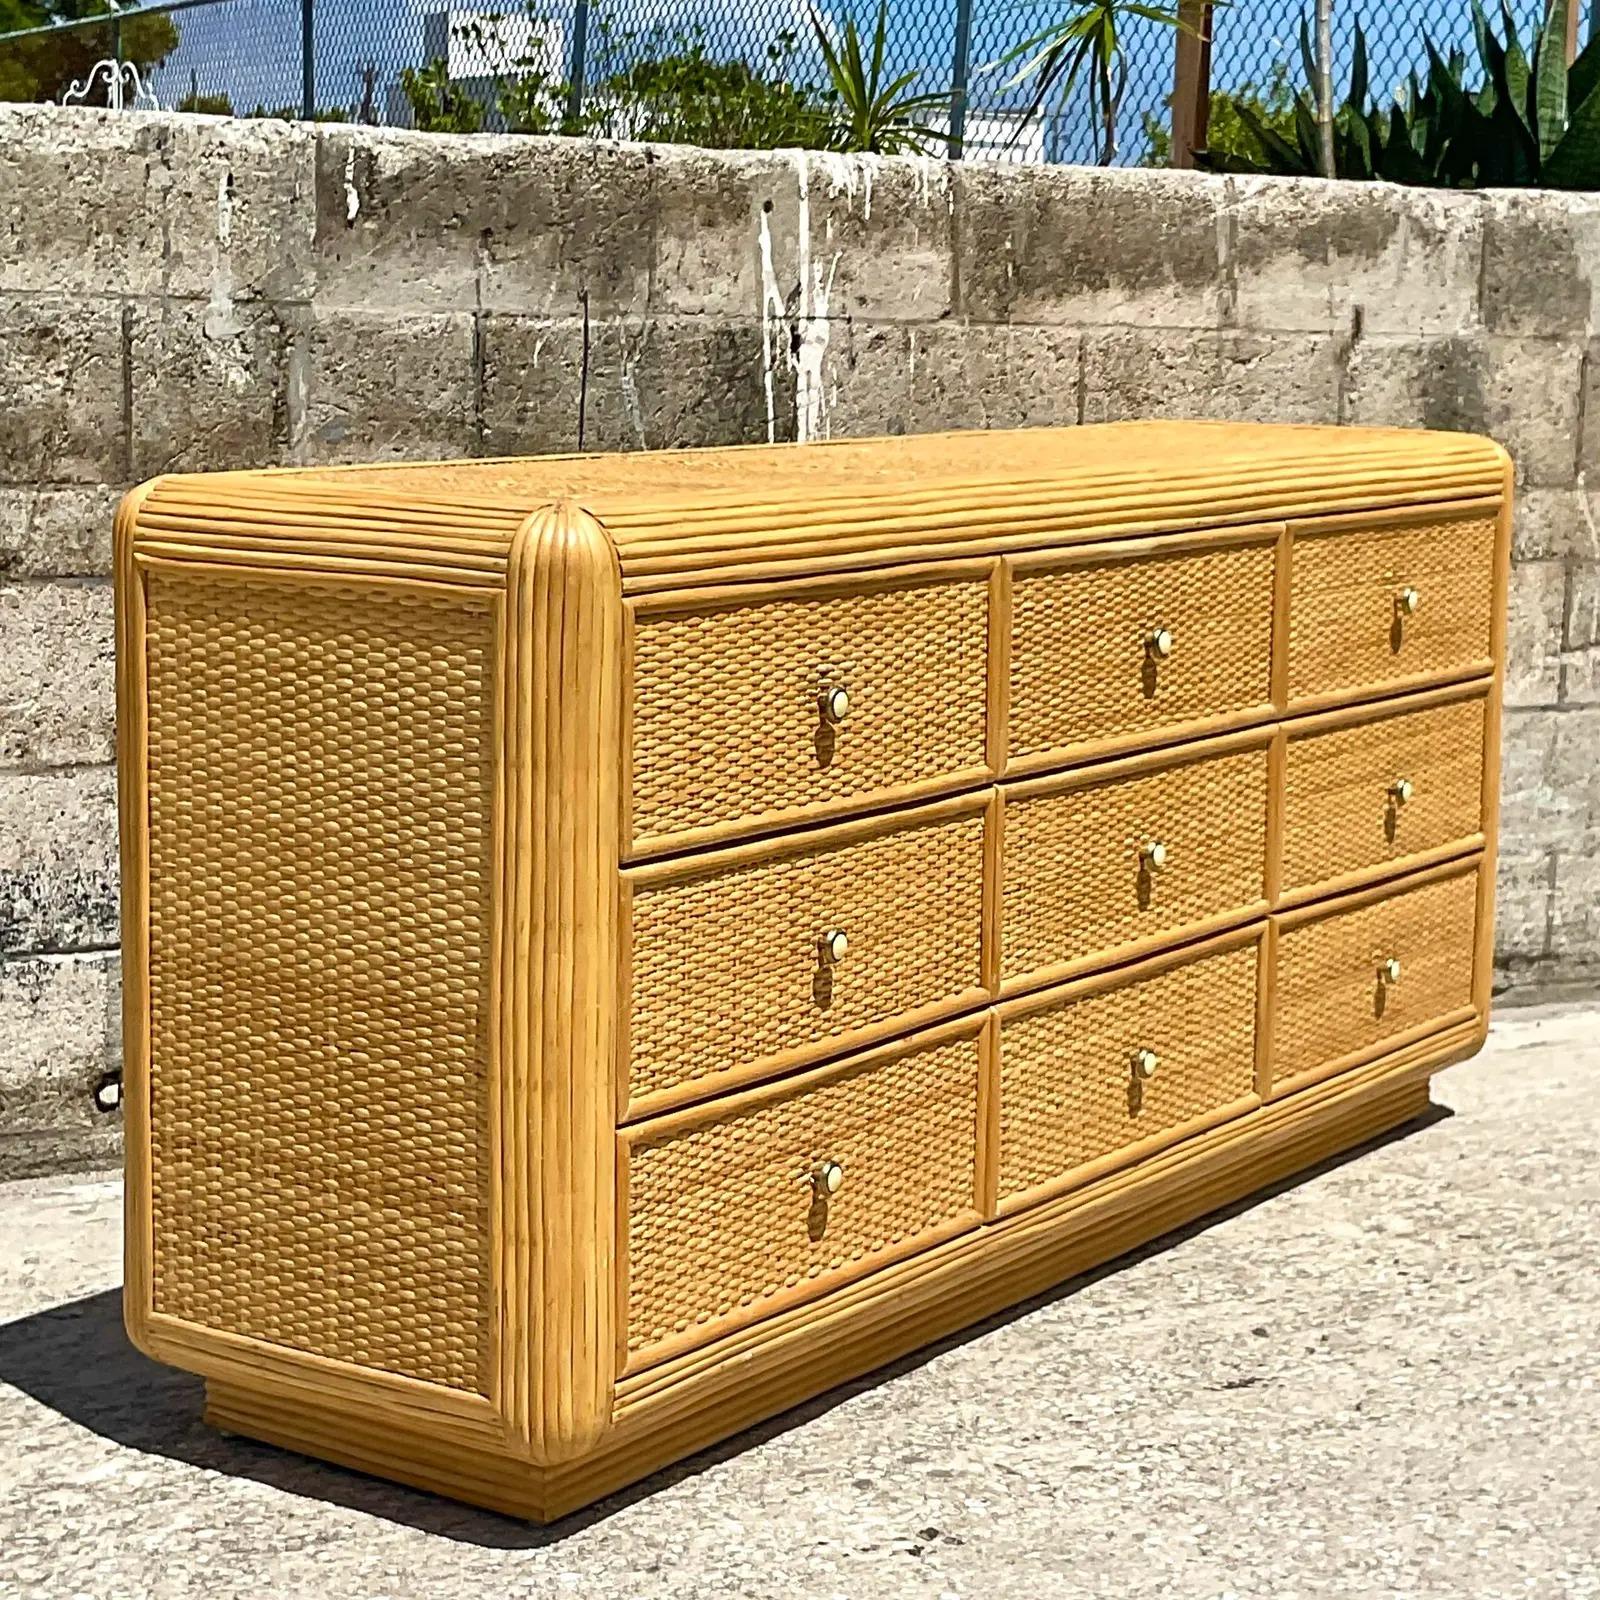 Fantastic vintage Coastal standard dresser. Beautiful pencil reed frame with inset woven rattan panels. A striking overall look. Acquired from a Palm Beach estate.